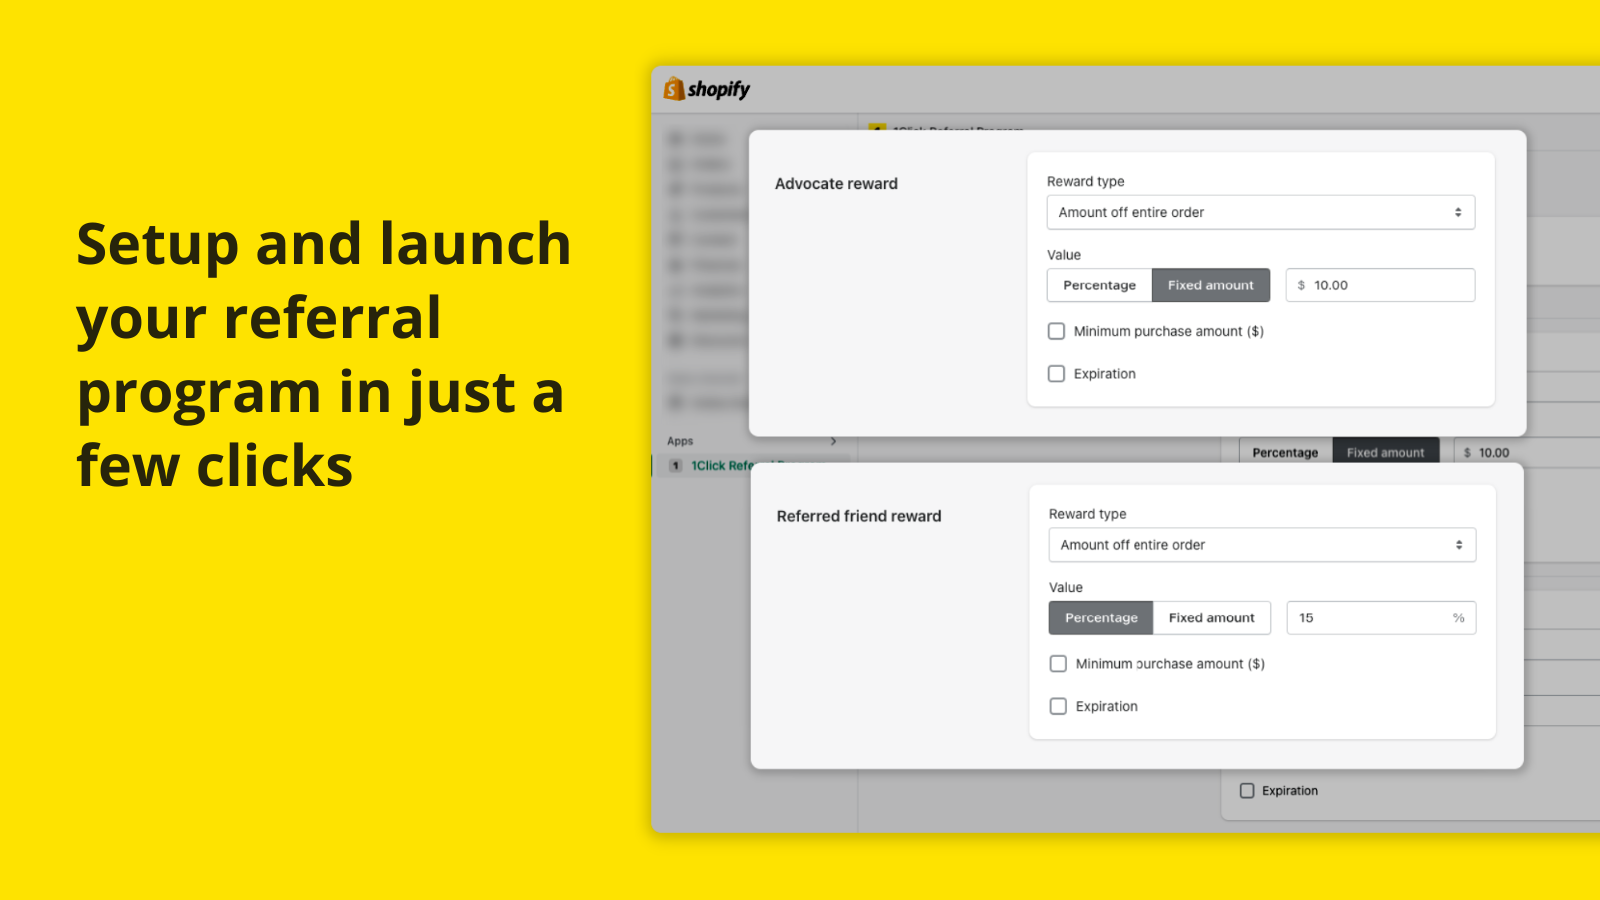 Setup and launch your referral program in just a few clicks